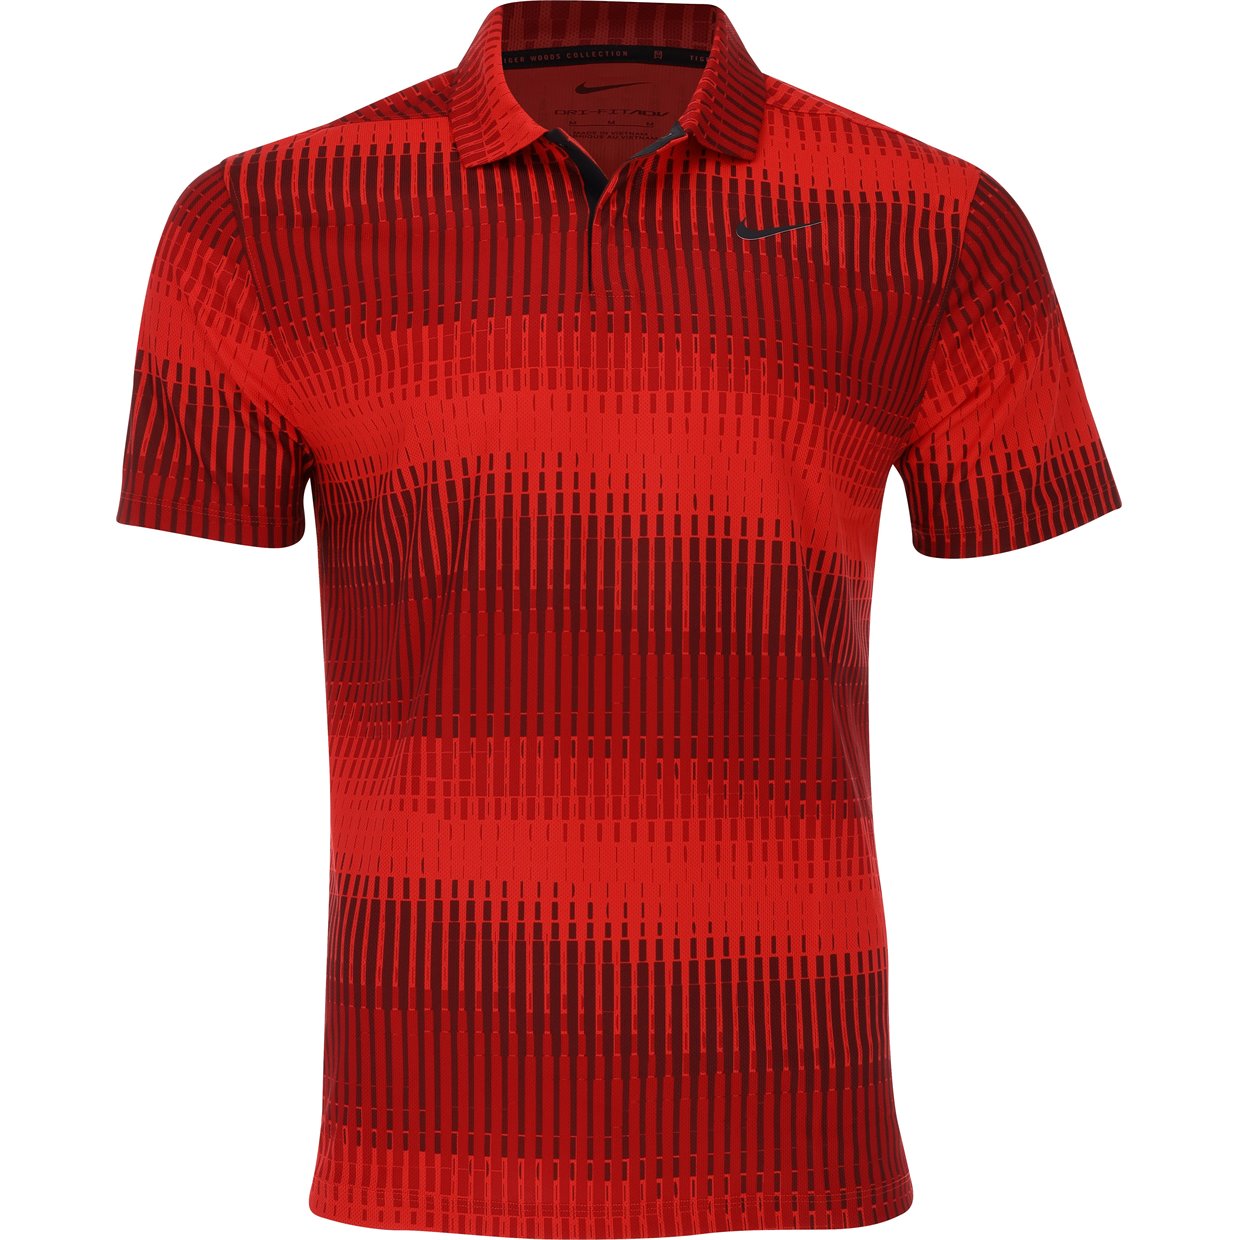 Tiger Woods apparel: This cool, stylish TW gear makes a great gift